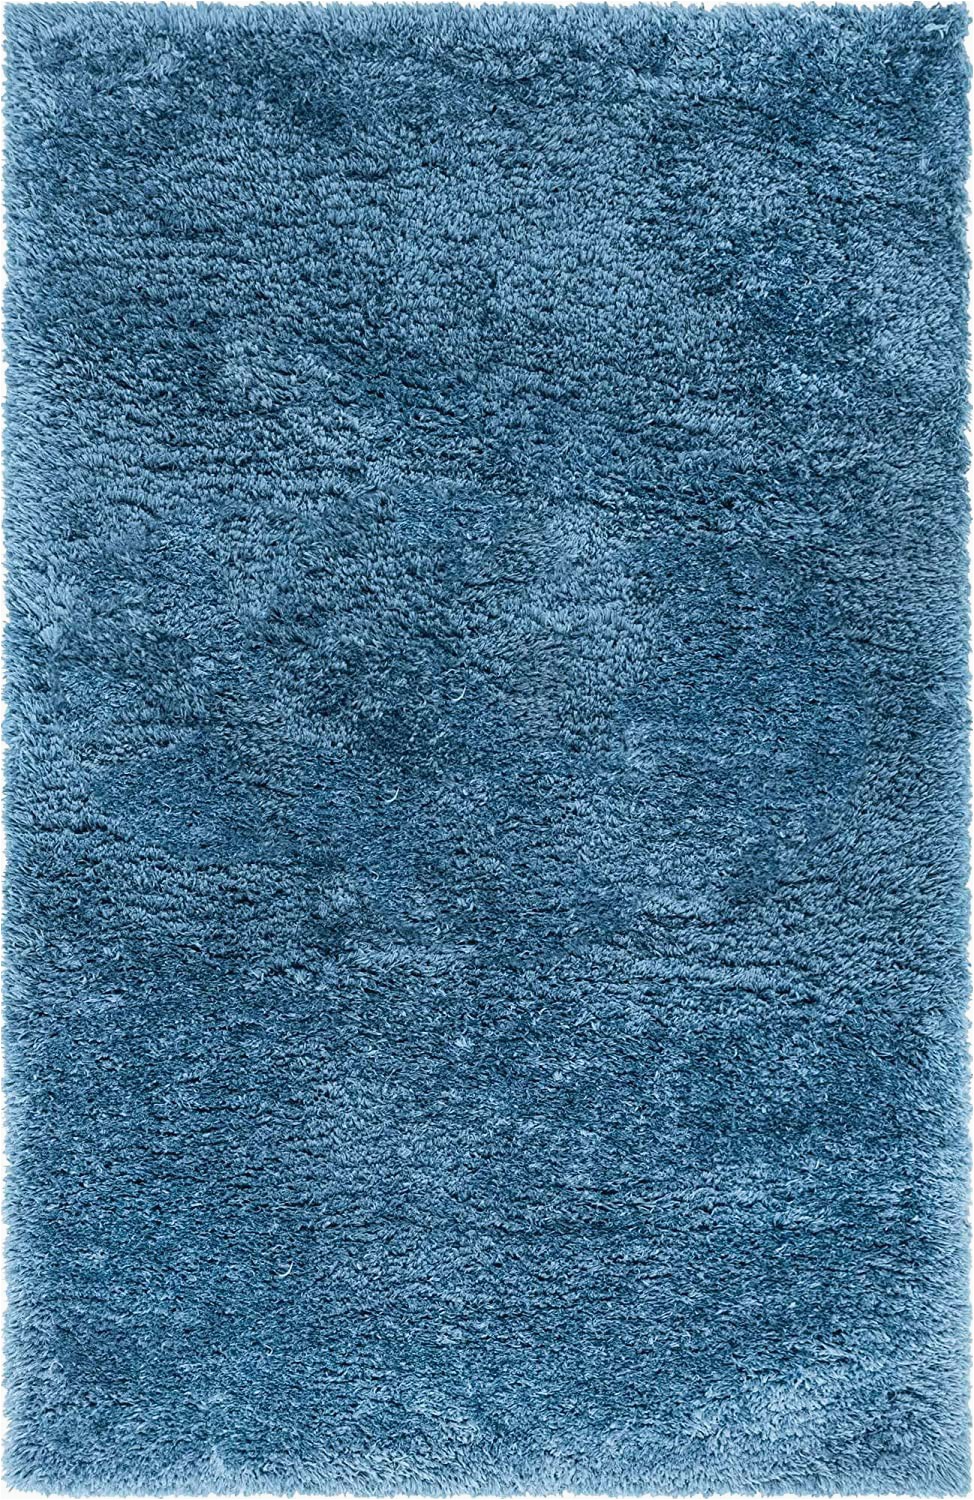 Solid Color area Rugs 6×9 Infinity Collection solid Shag area Rug by Rugs – Blue 9 X 12 High Pile Plush Shag Rug Perfect for Living Rooms Bedrooms Dining Rooms and More